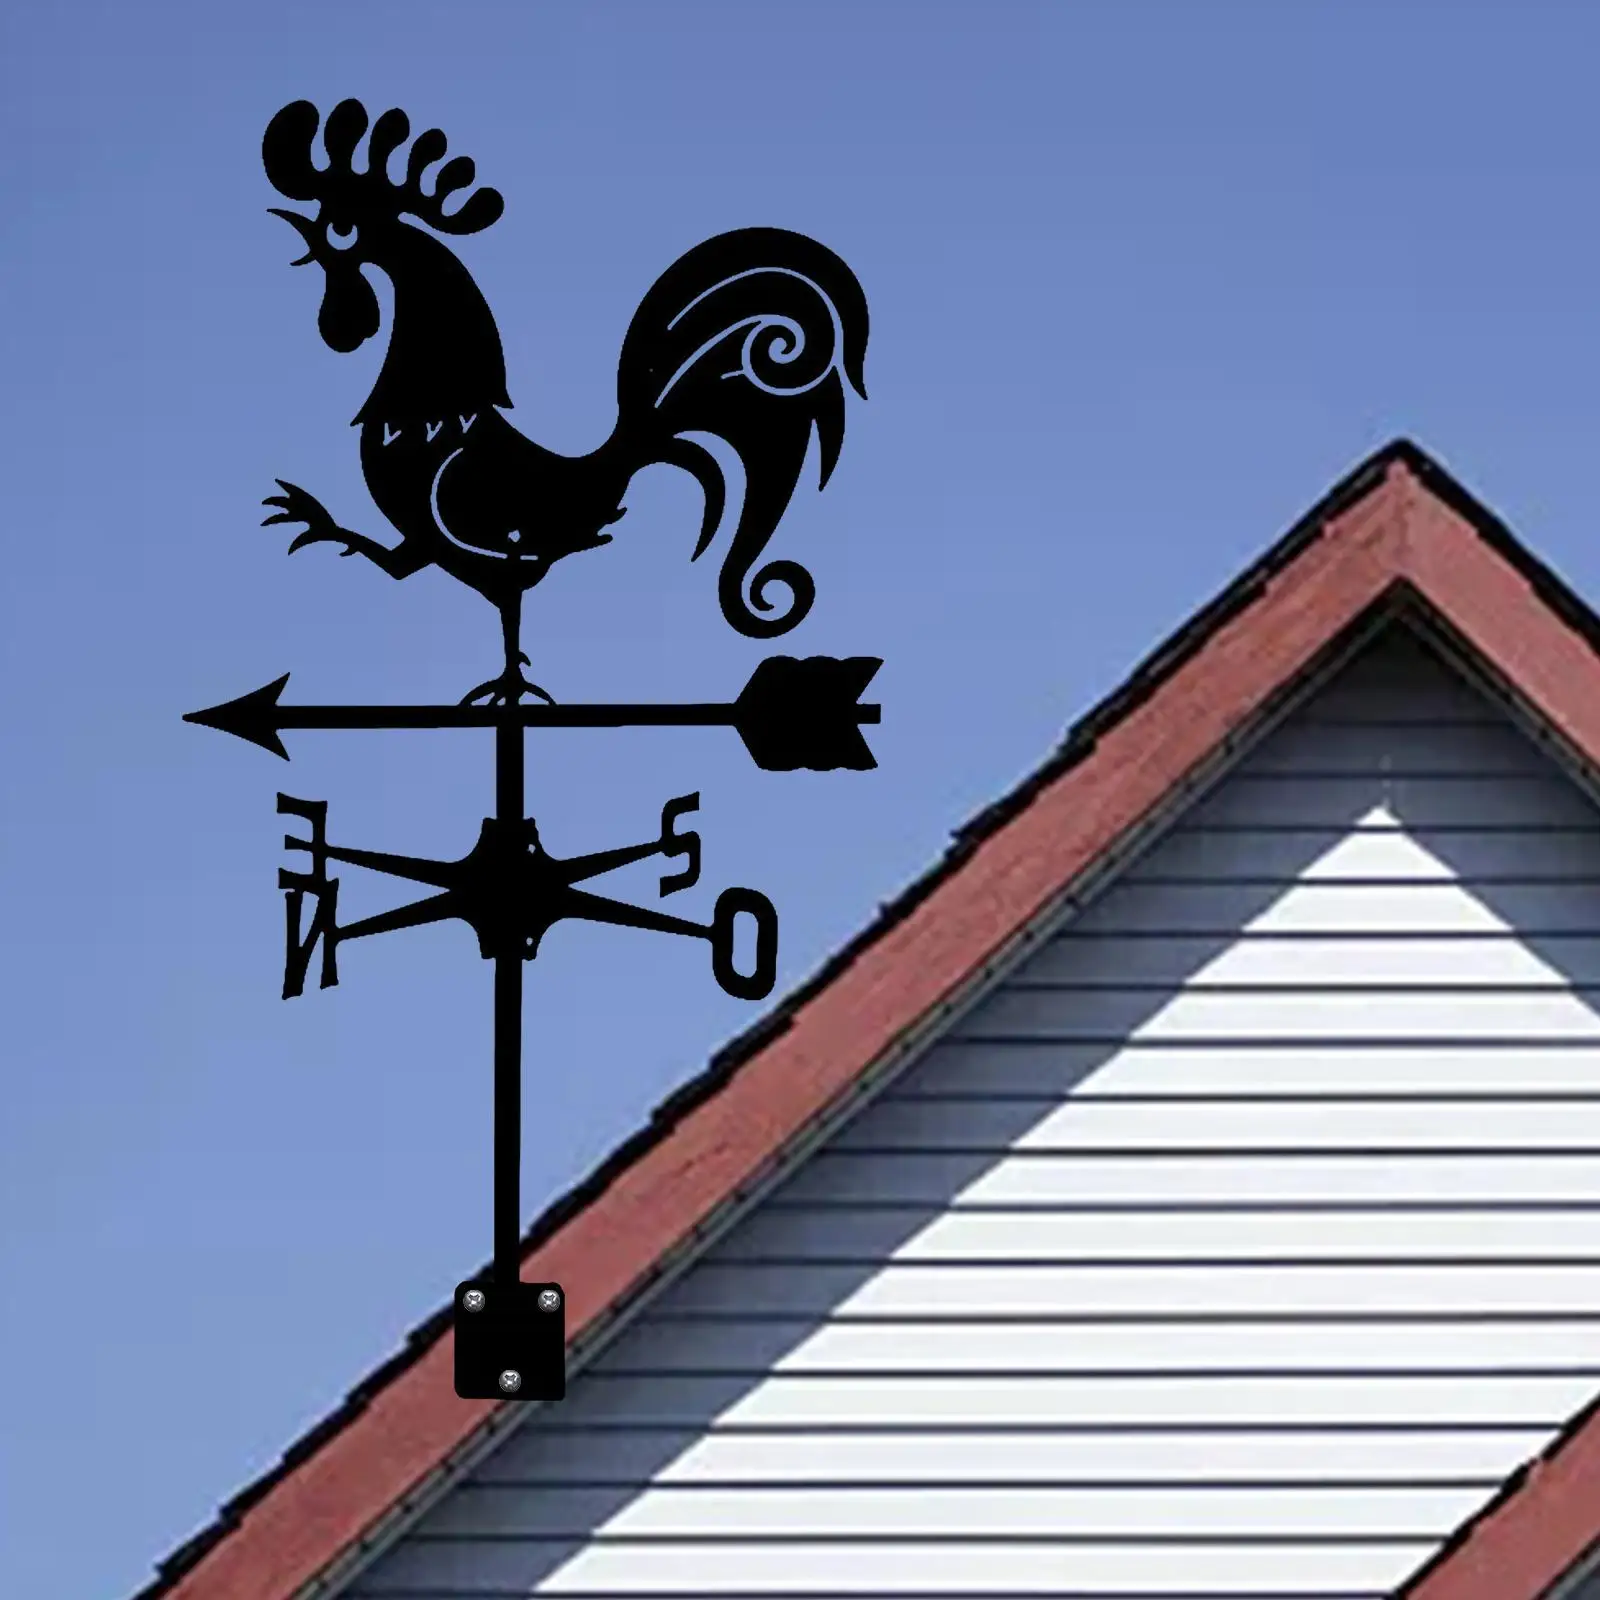 Wrought Iron Weathervane Classic Style Direction Indicator Weather Vane Outdoor Scene Ornament for Lawn Cupola Garden Barn Decor